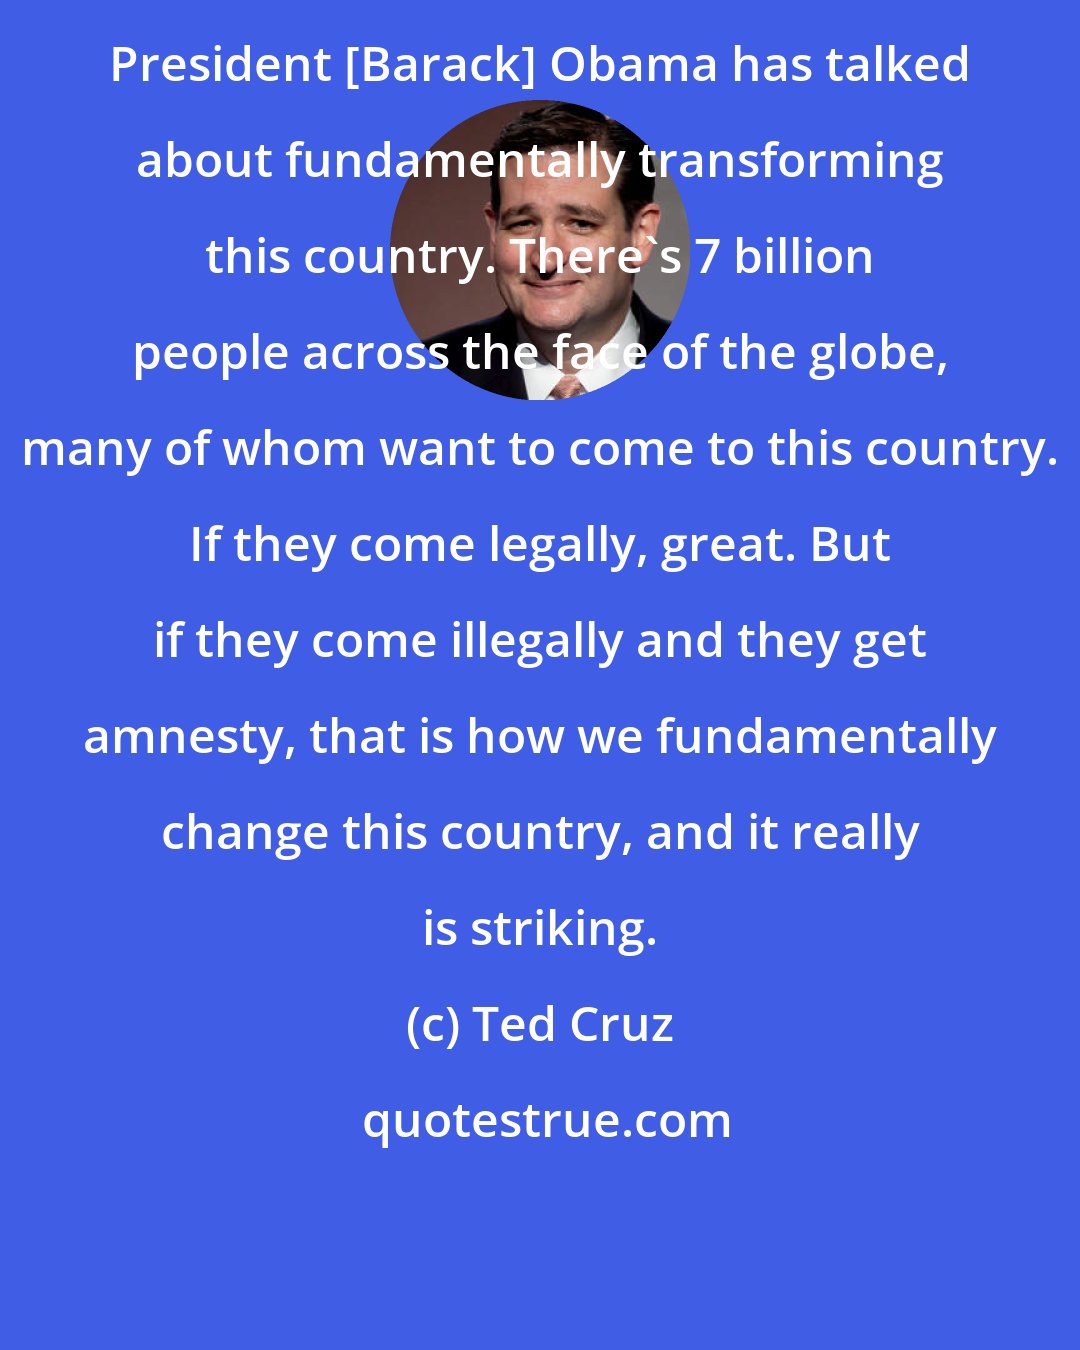 Ted Cruz: President [Barack] Obama has talked about fundamentally transforming this country. There's 7 billion people across the face of the globe, many of whom want to come to this country. If they come legally, great. But if they come illegally and they get amnesty, that is how we fundamentally change this country, and it really is striking.